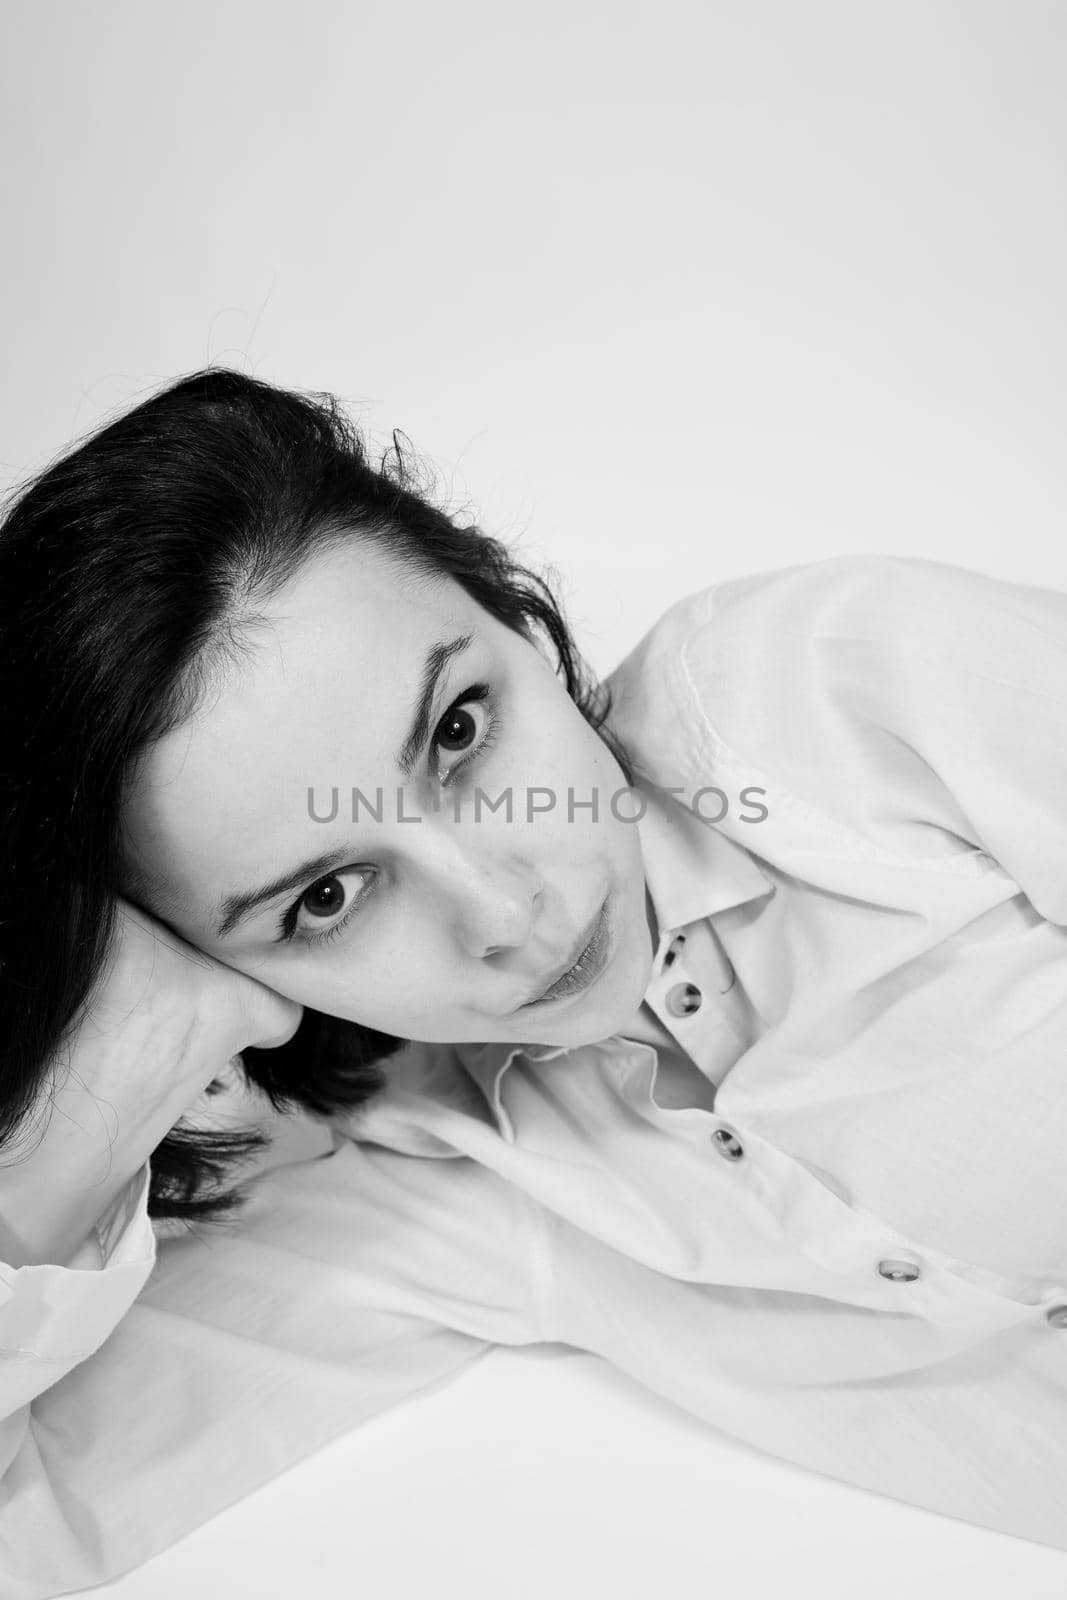 brunette woman lies on the floor, black and white photo by shilovskaya